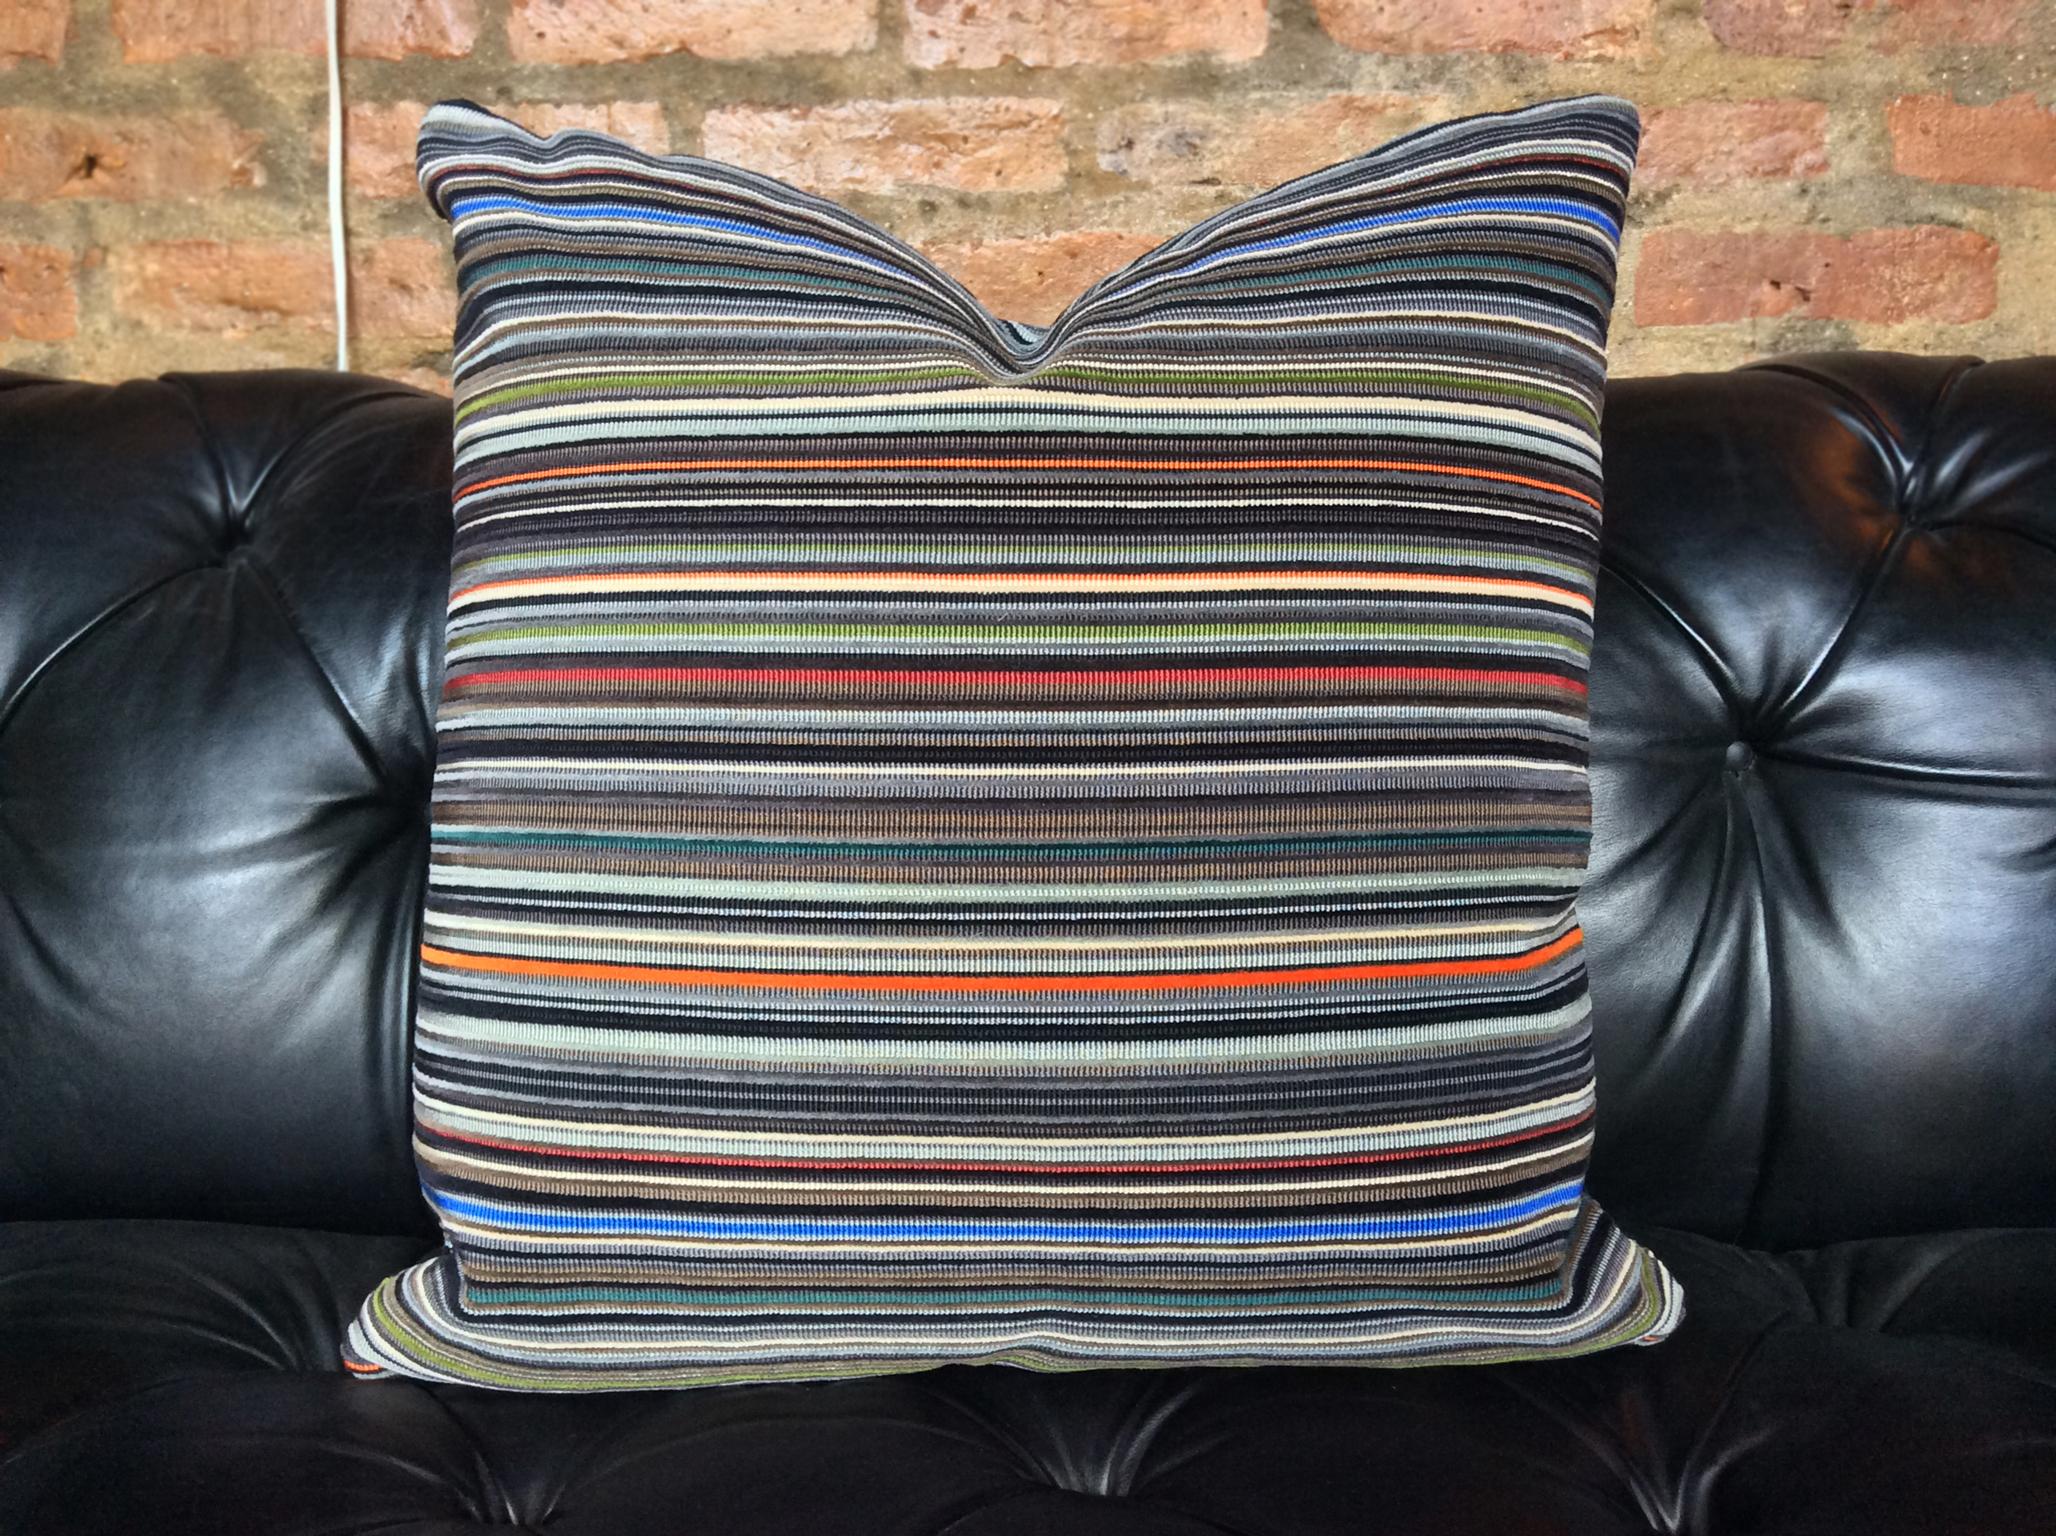 Handsomely designed pillow with Paul Smith textile. The fabric is a soft cotton, while its stripe patterning is a rich, lovely palette of varying colors. Each pillow is cushioned in a combination of down and Dacron. It's a pillow of comfortable and